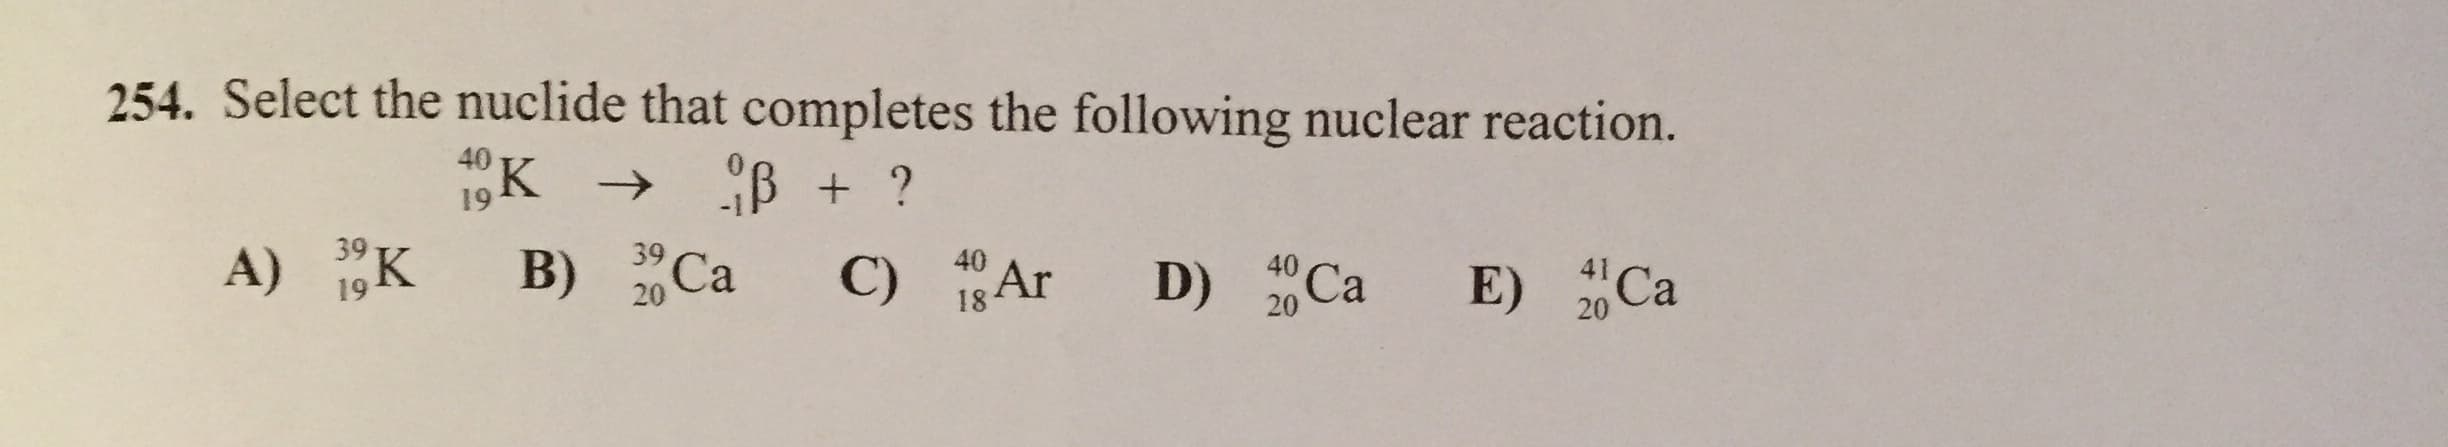 254. Select the nuclide that completes the following nuclear reaction.
40
K
19
41 Ca
39 Ca
20
40
D) 2 Ca
39
A) 1,K
20
18 Ar
